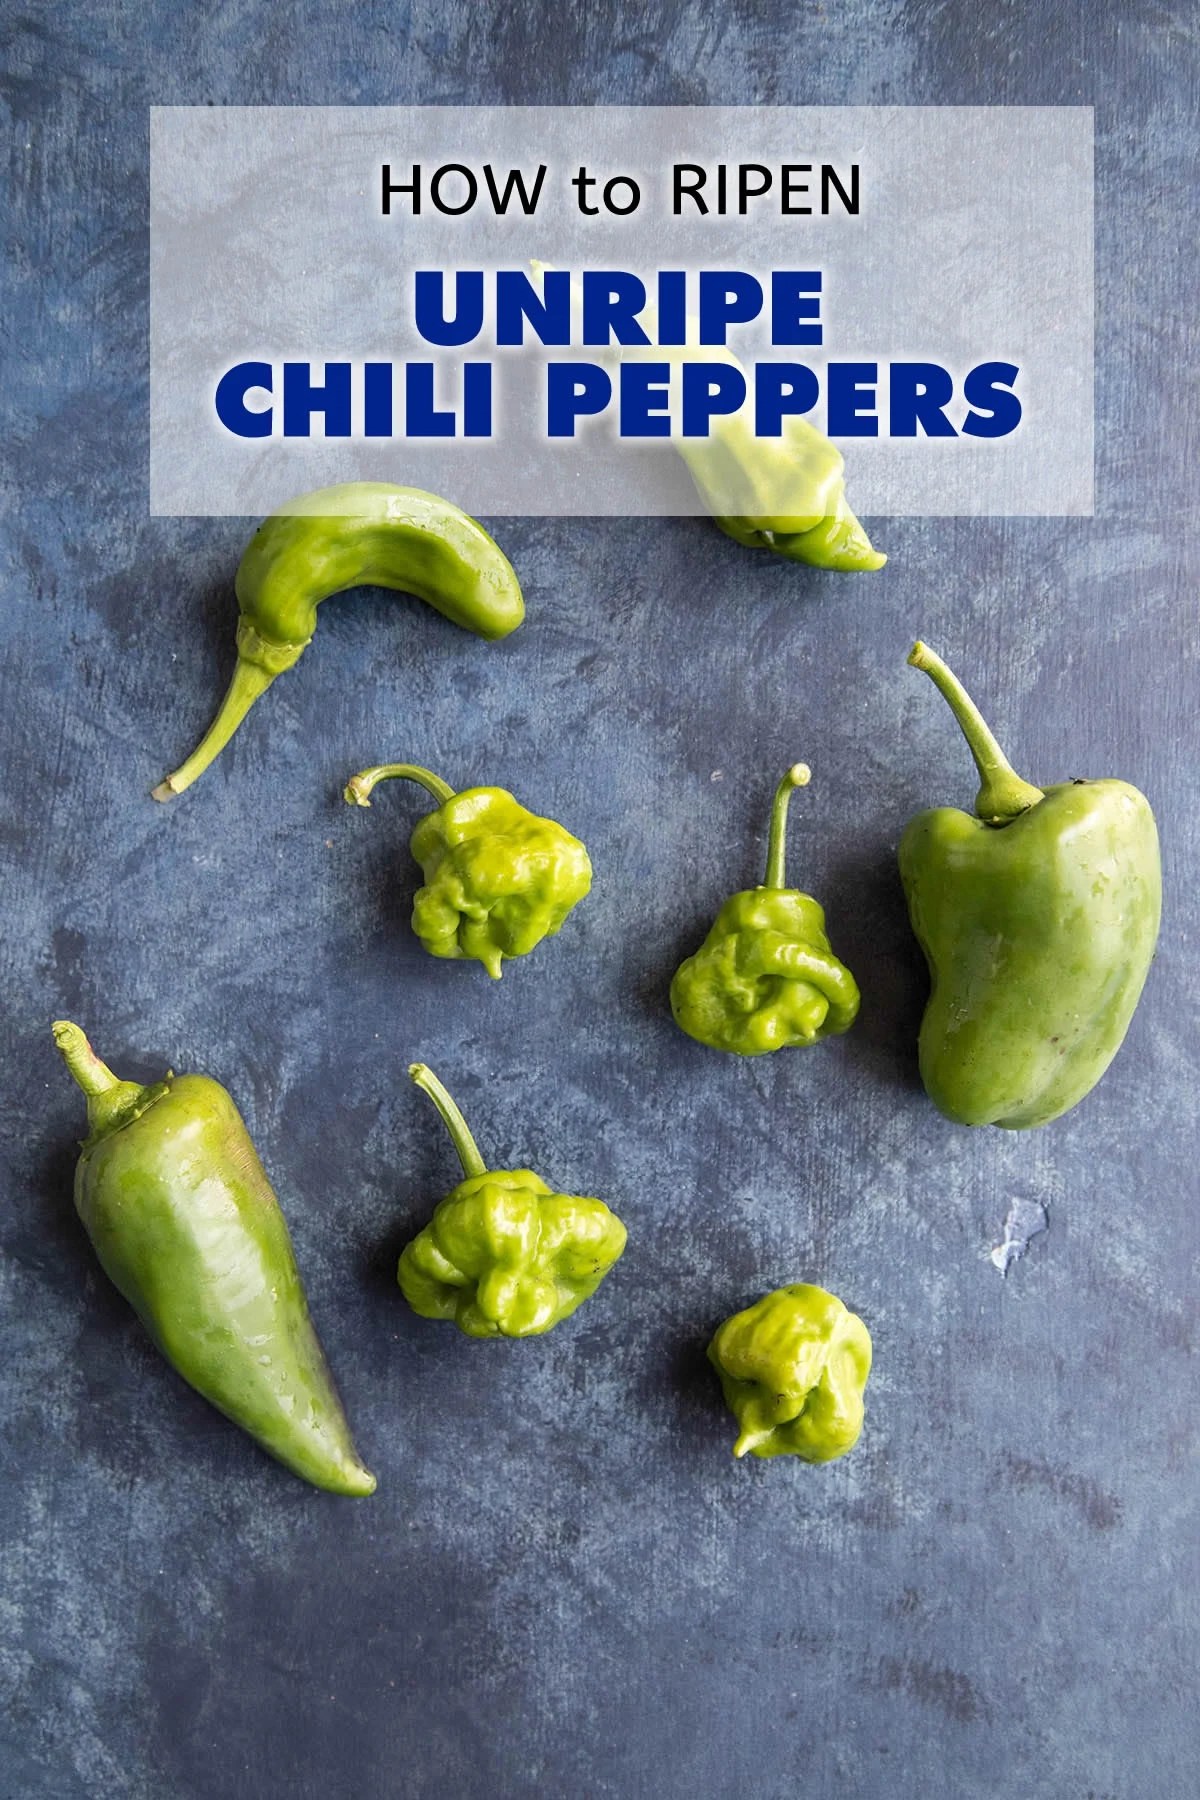 How to Ripen Unripe Peppers